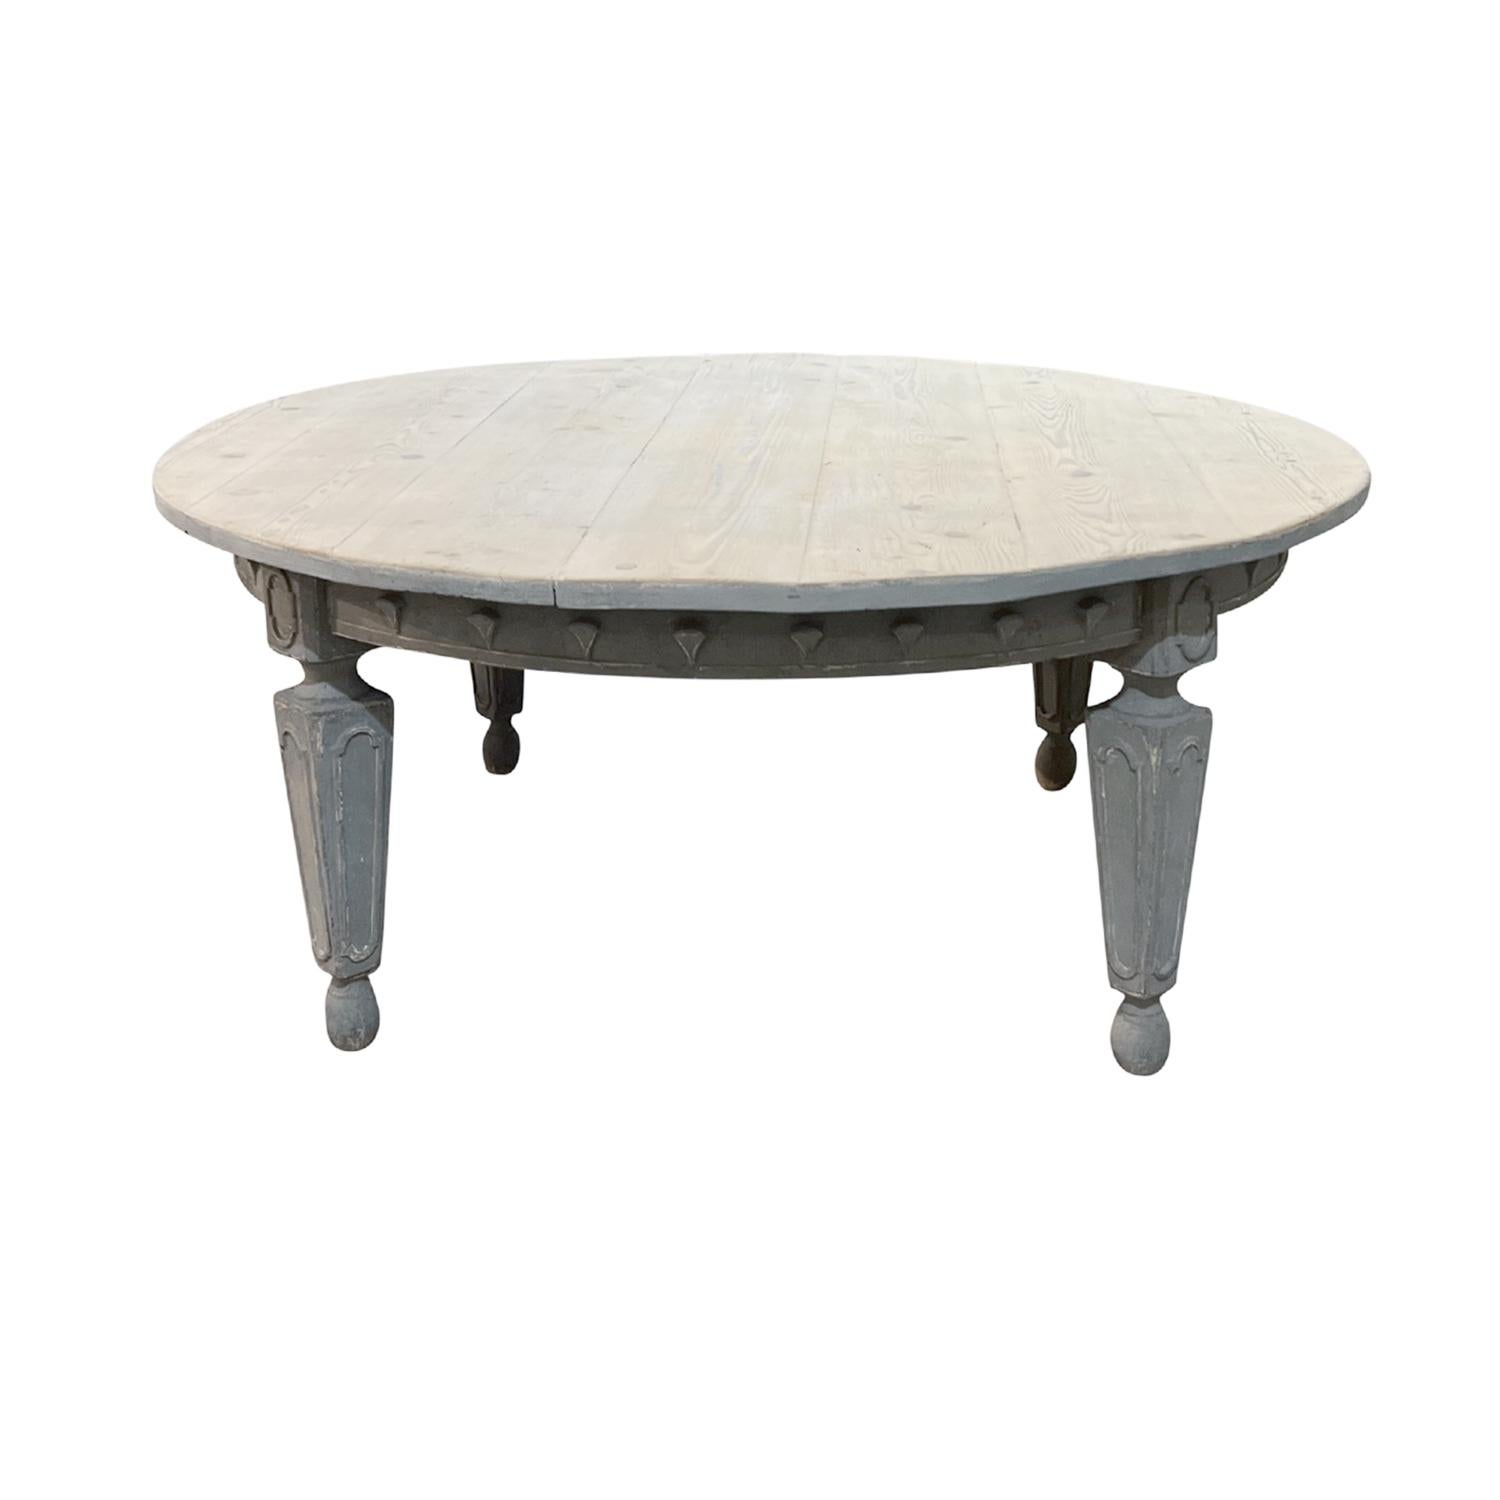 19th Century Italian Pine Dining Room Table - Antique Tuscan Conference Table In Good Condition For Sale In West Palm Beach, FL